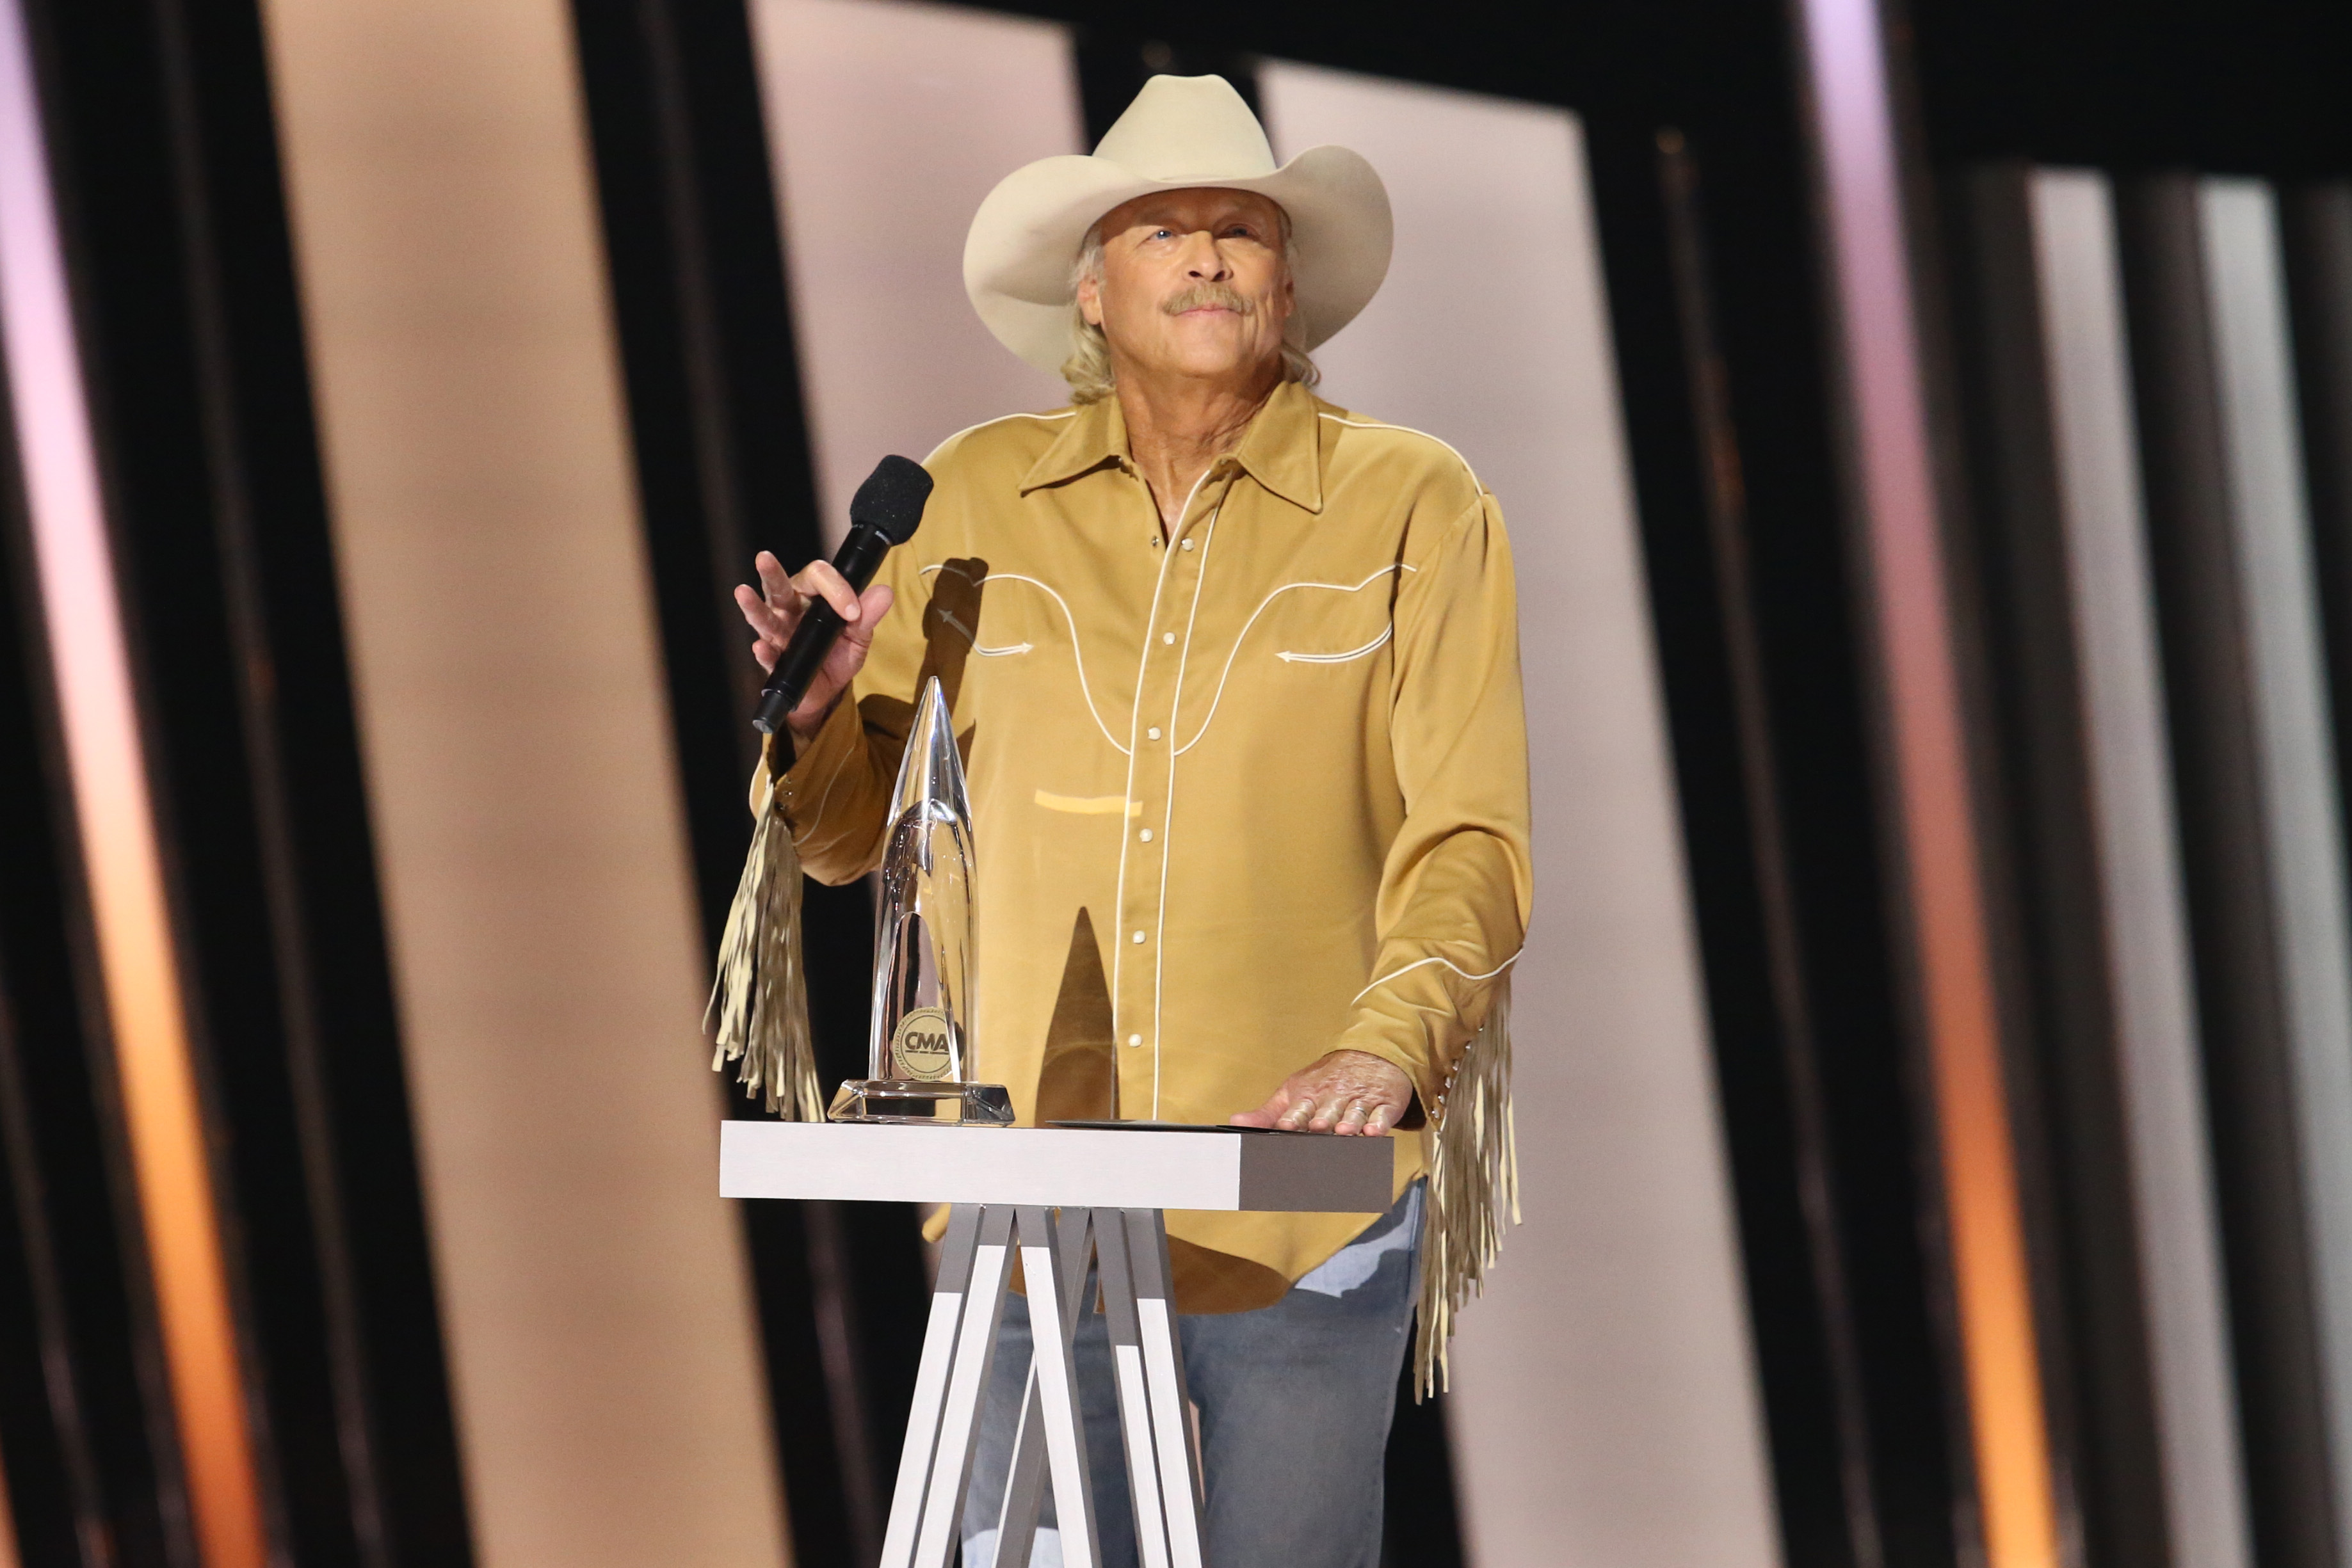 Alan Jackson during the 55th annual Country Music Association awards at Bridgestone Arena on November 10, 2021 in Nashville, Tennessee | Source: Getty Images